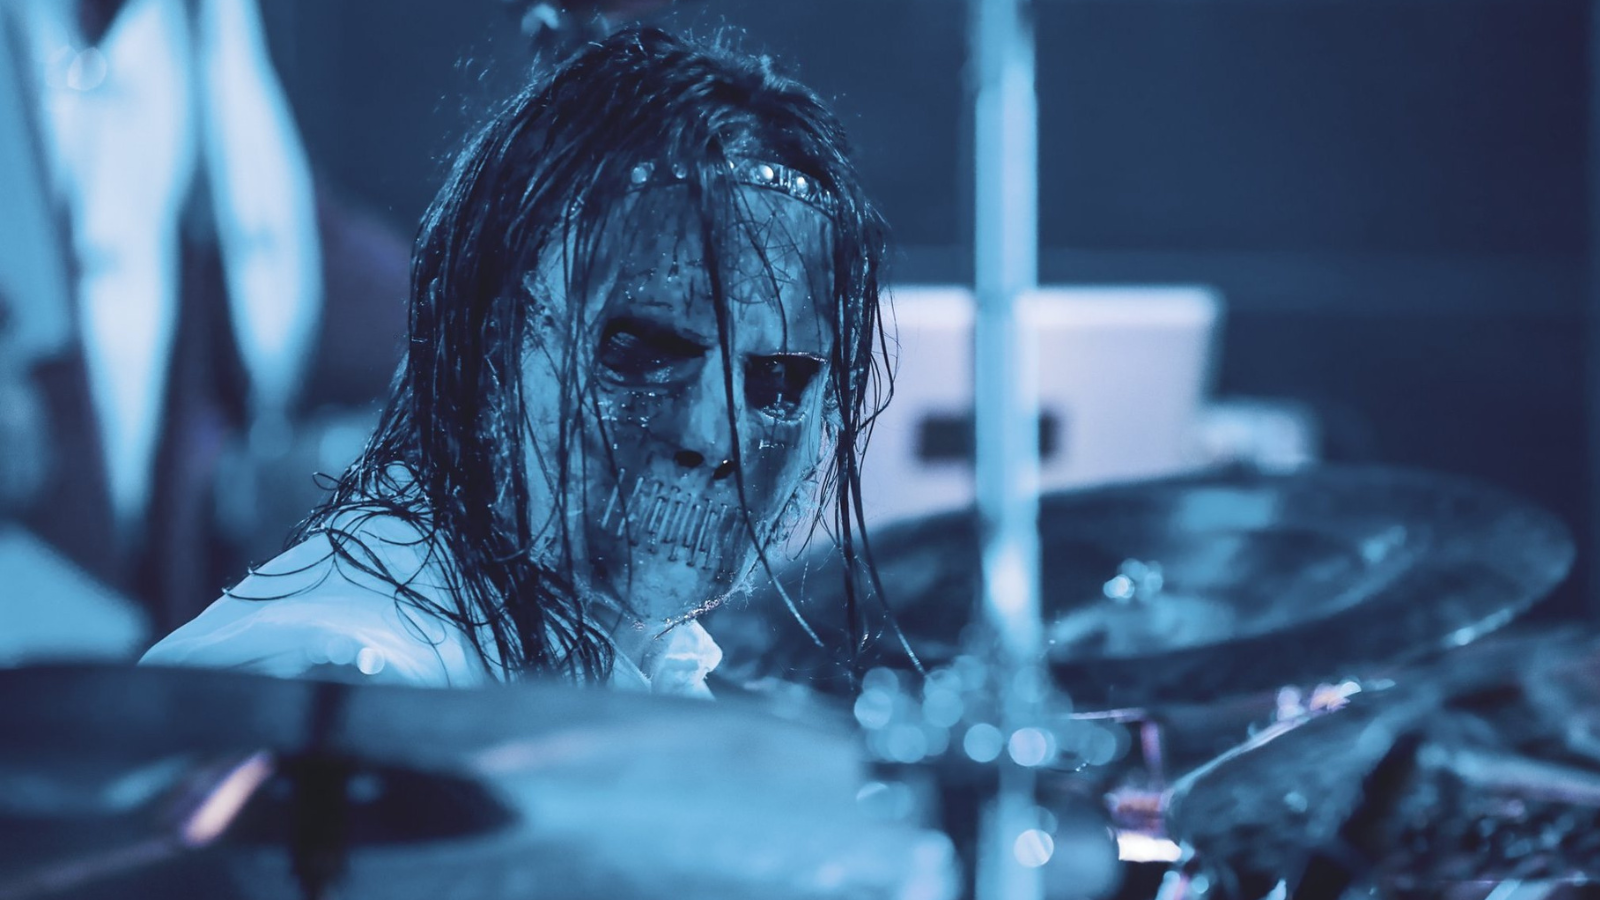 jay weinberg speaks to why he feels slipknot is an ageless band